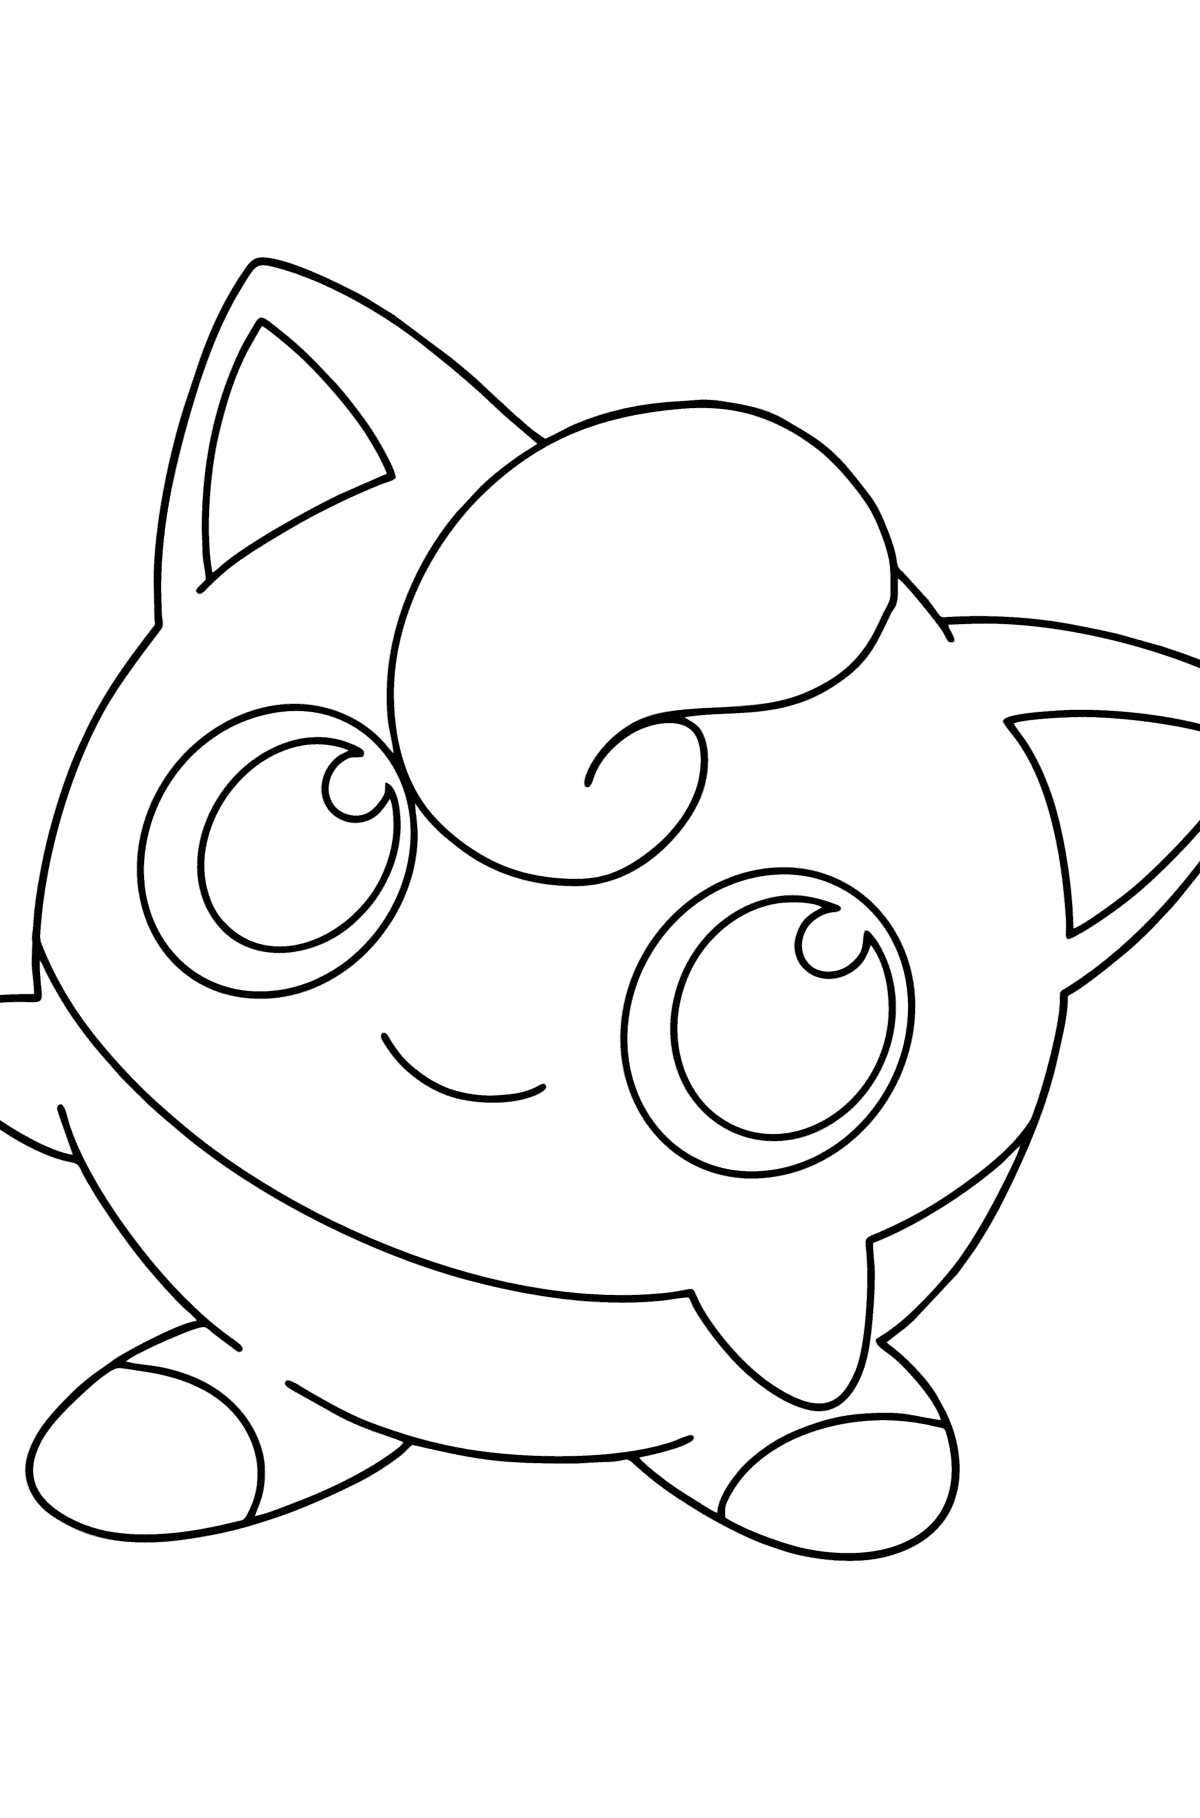 Coloring page Pokémon Go Jigglypuff - Coloring Pages for Kids